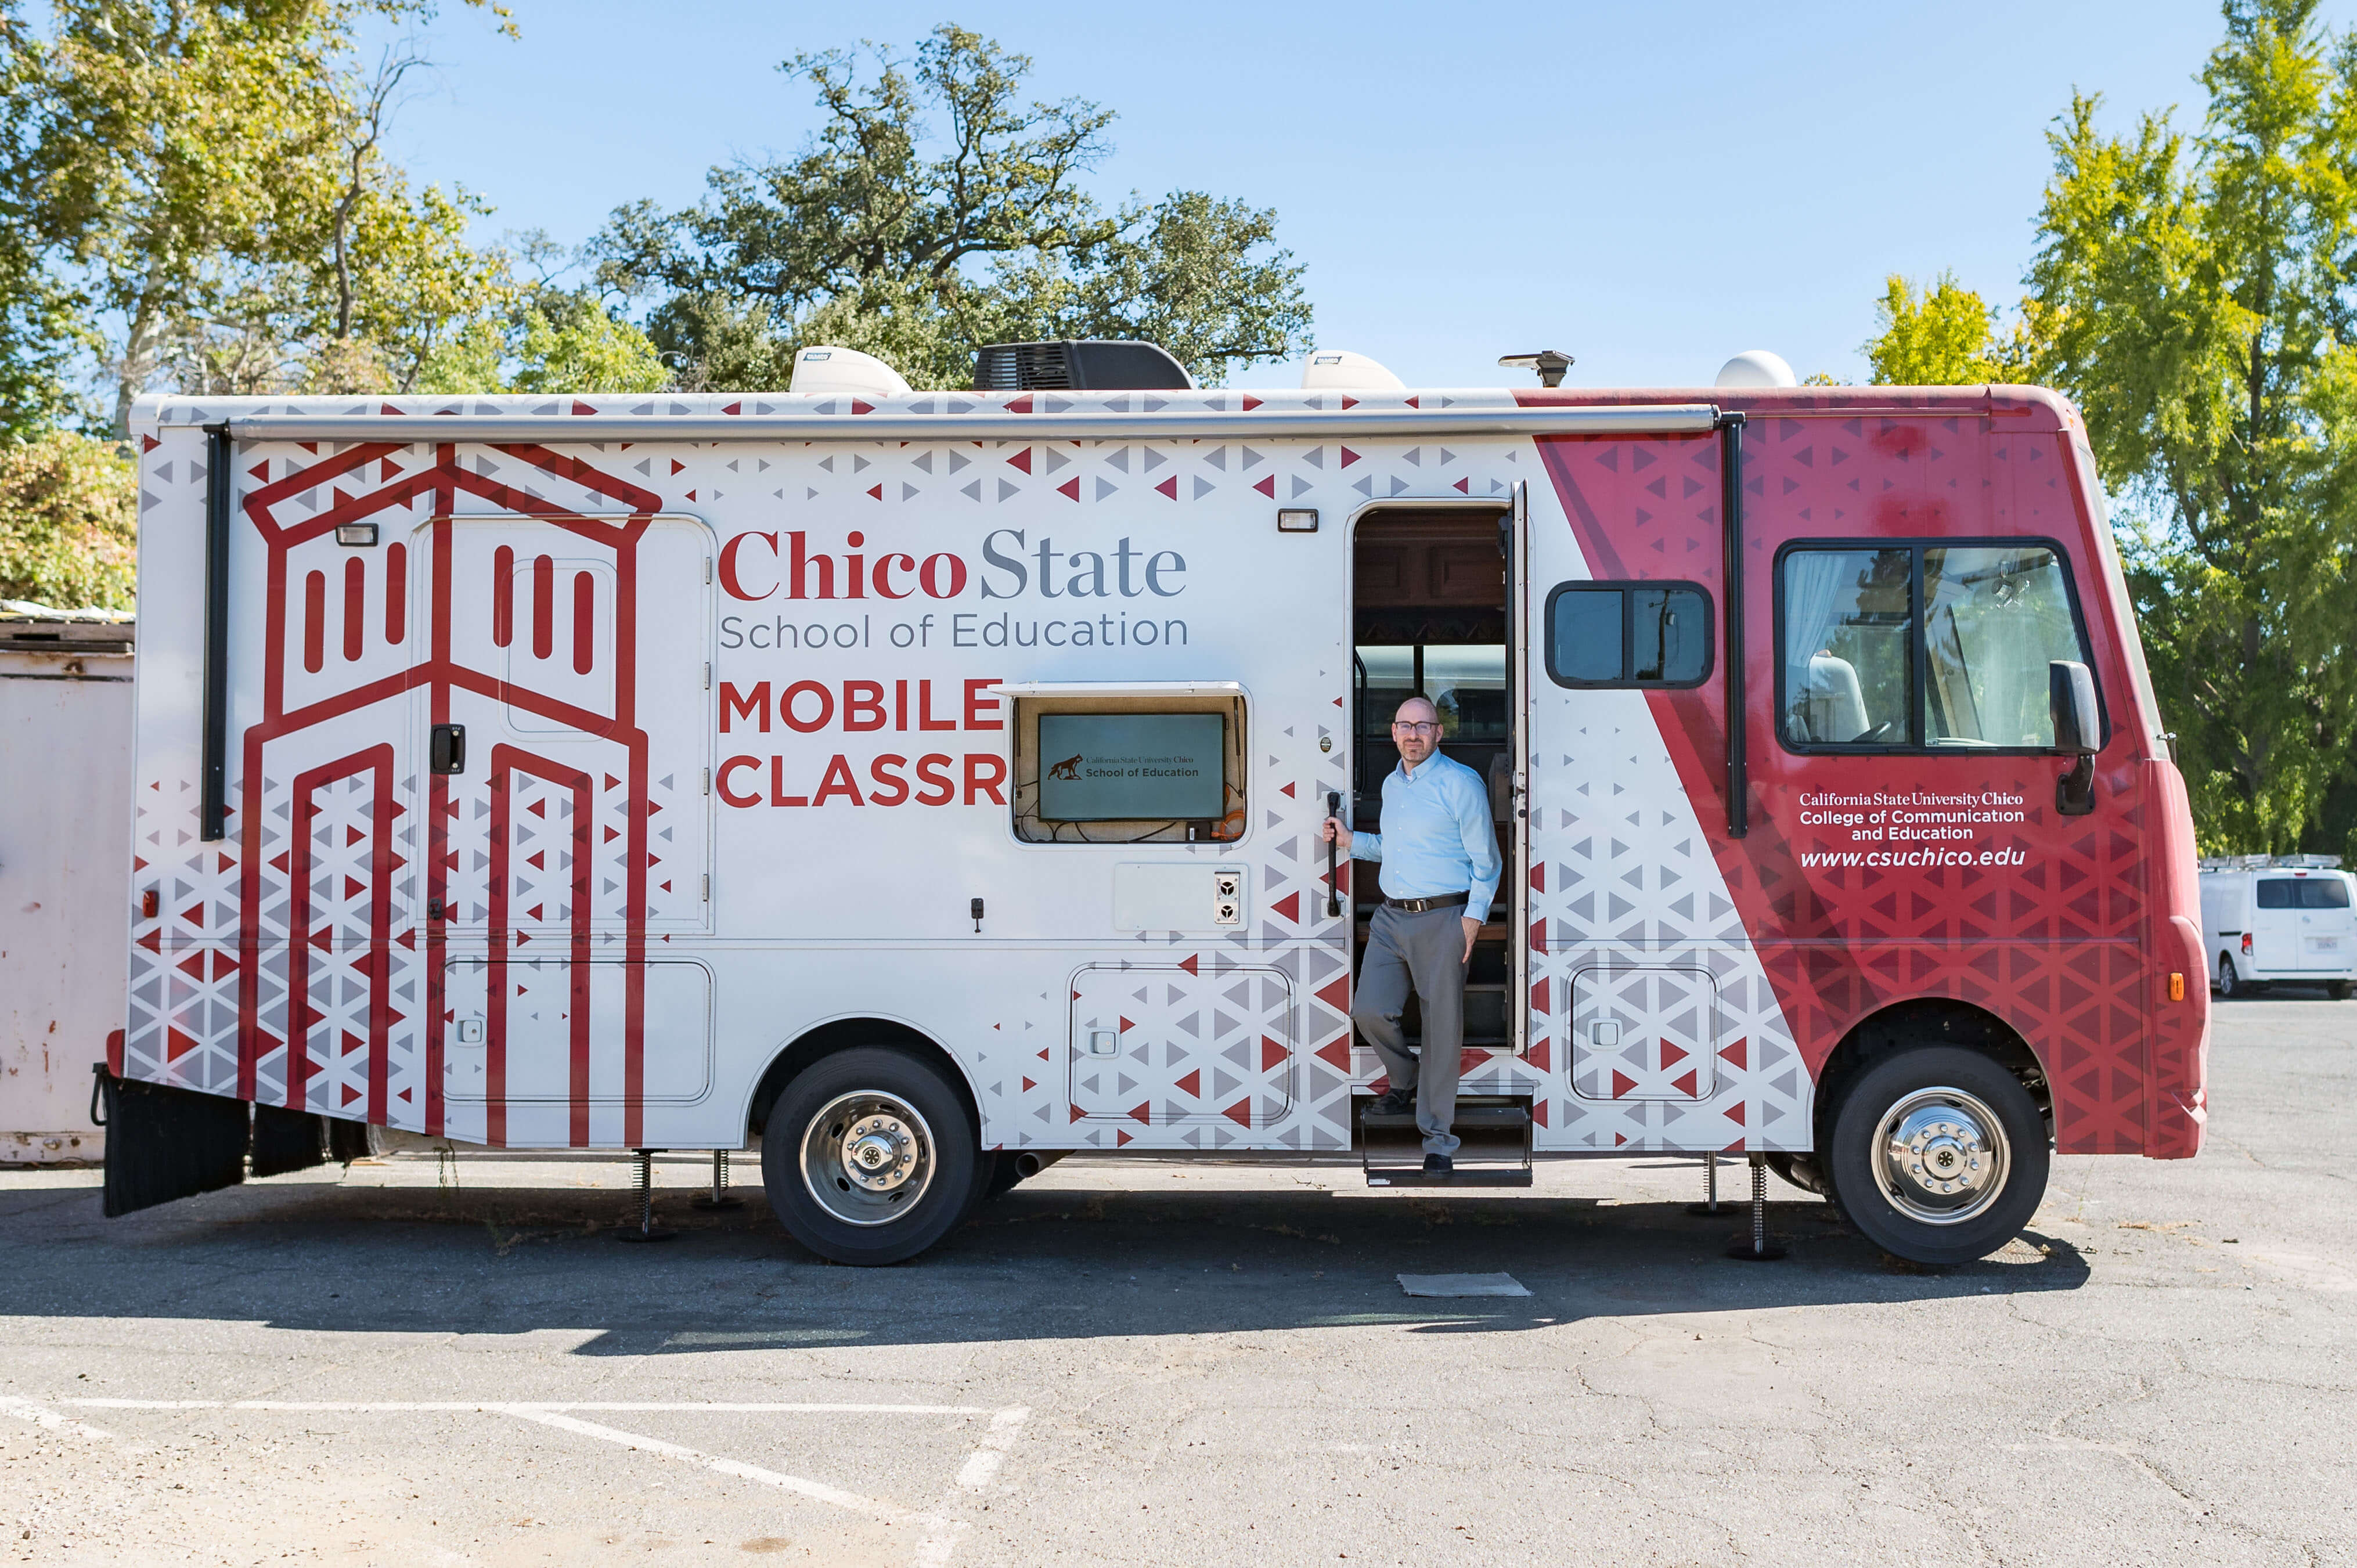 Chico State's mobile classroom